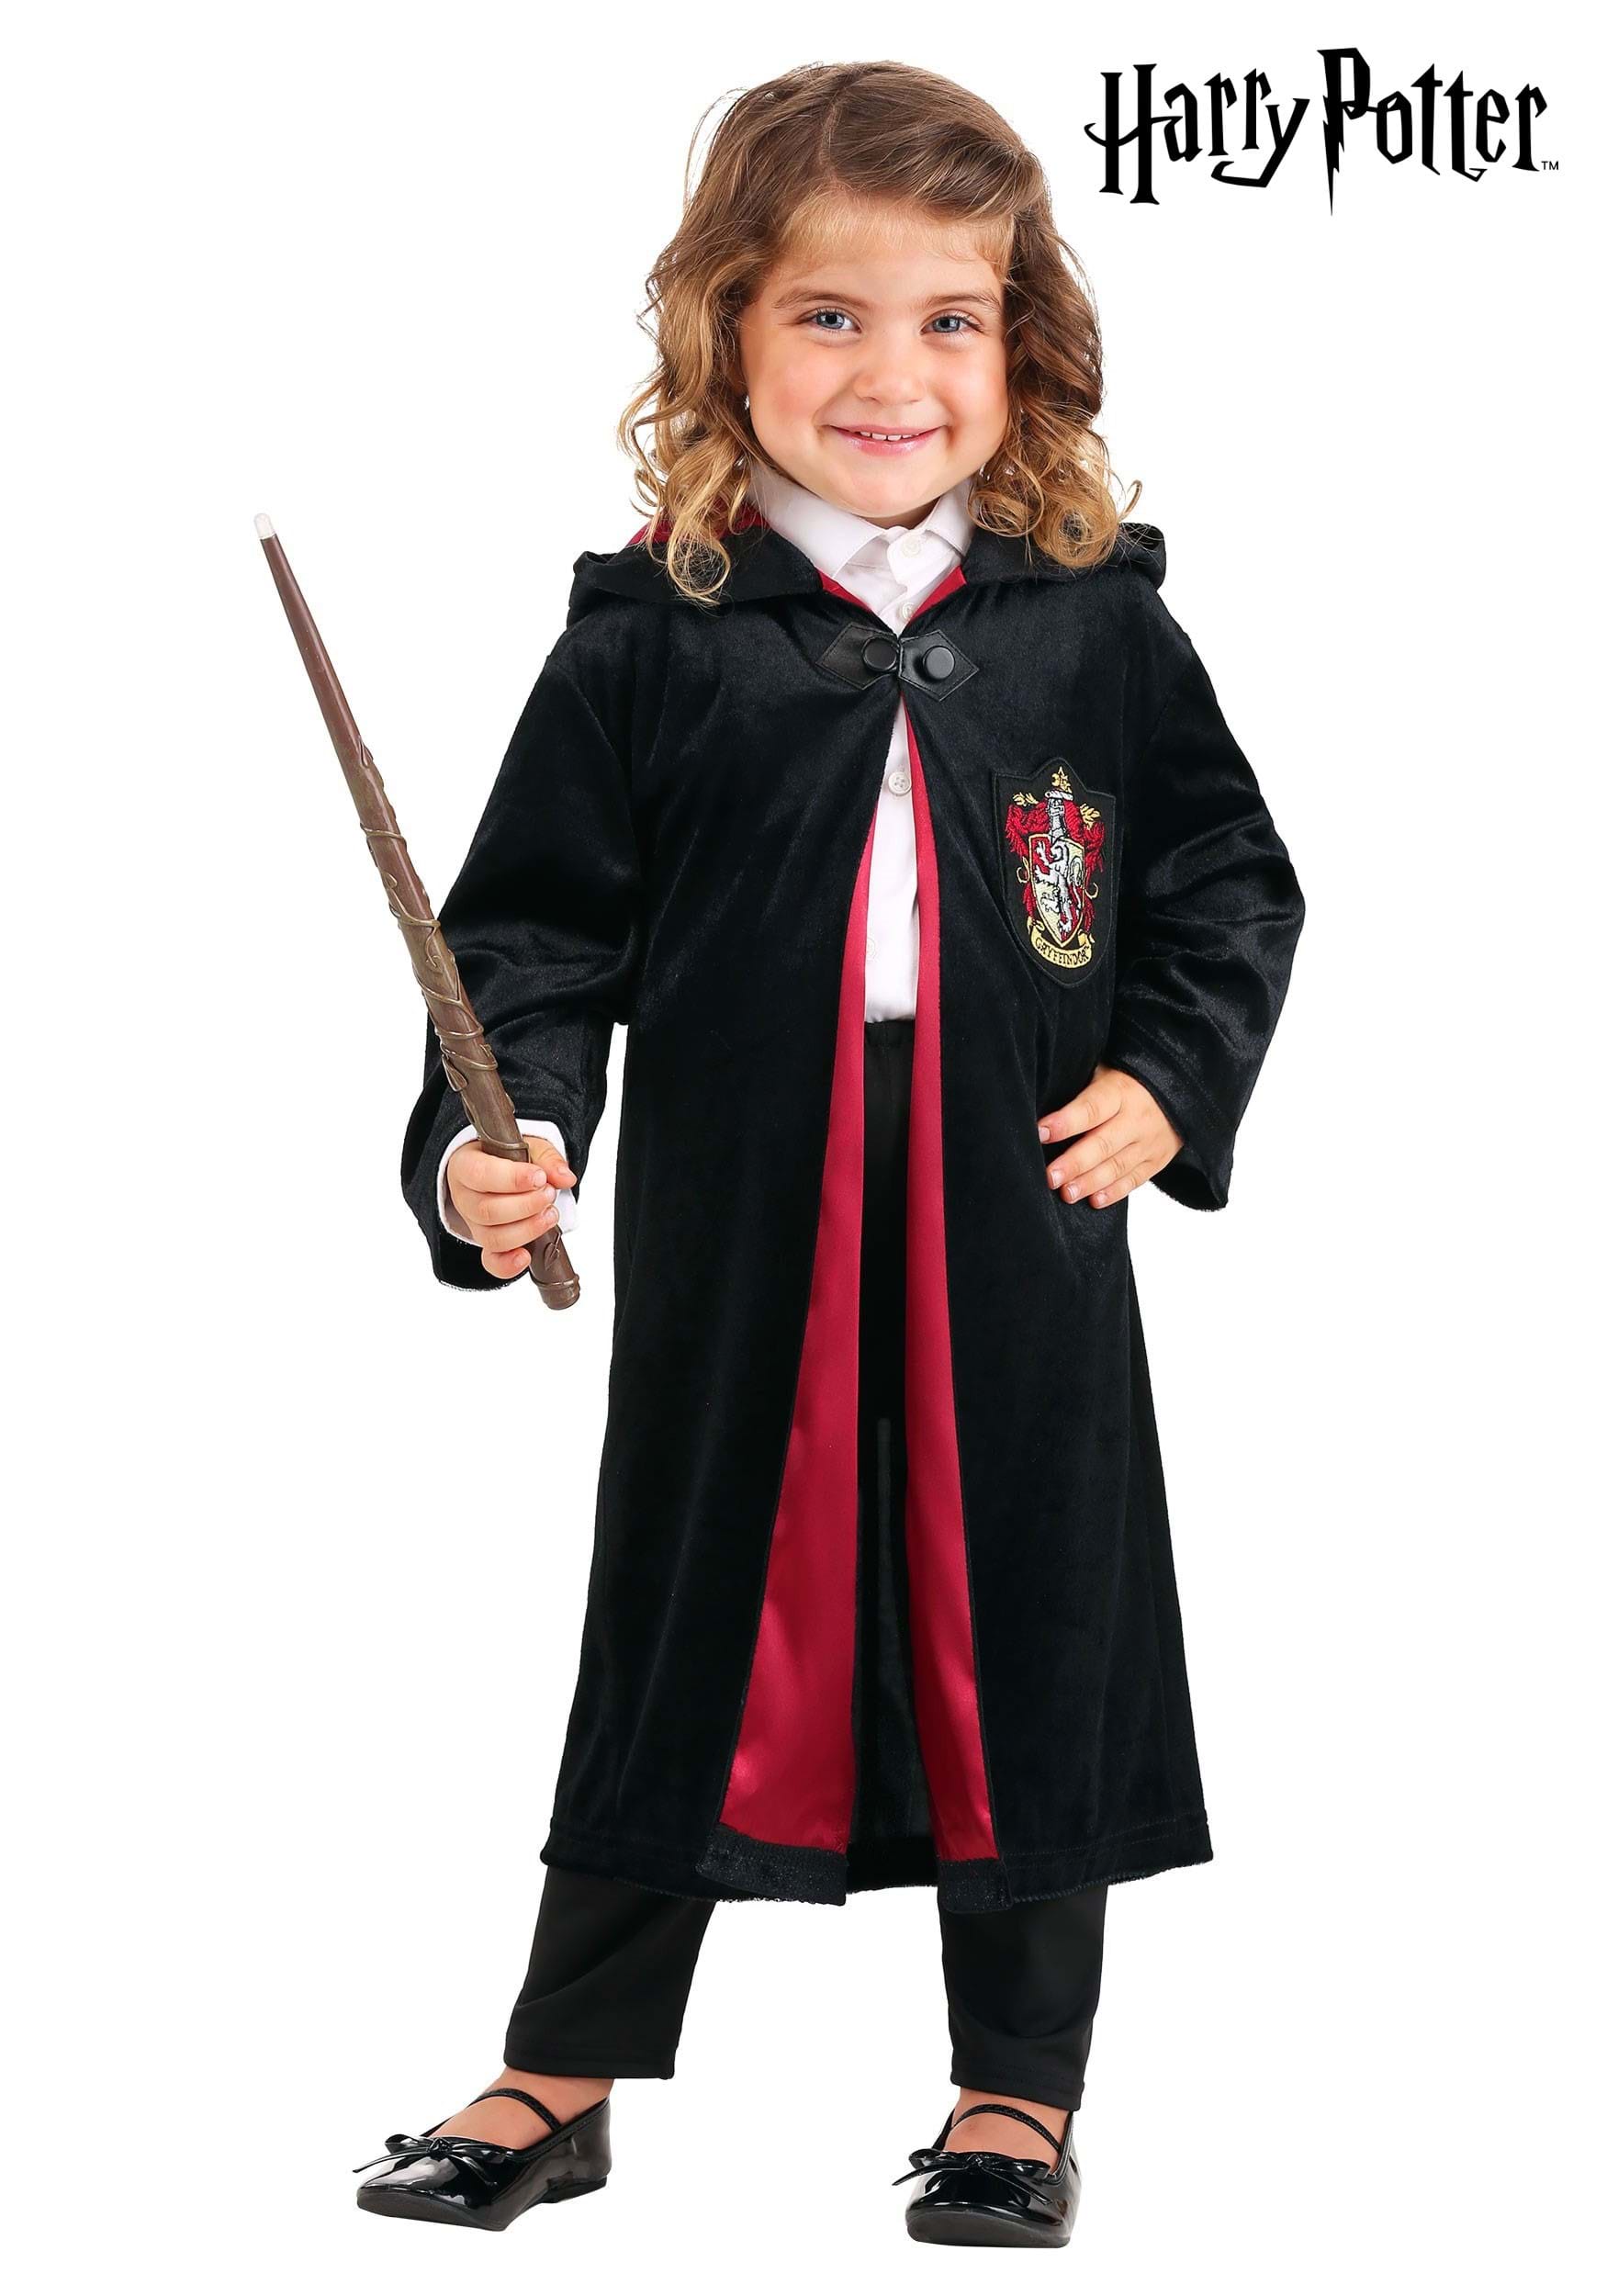 Harry Potter Gryffindor Robe Glasses and Wand Halloween Costume 